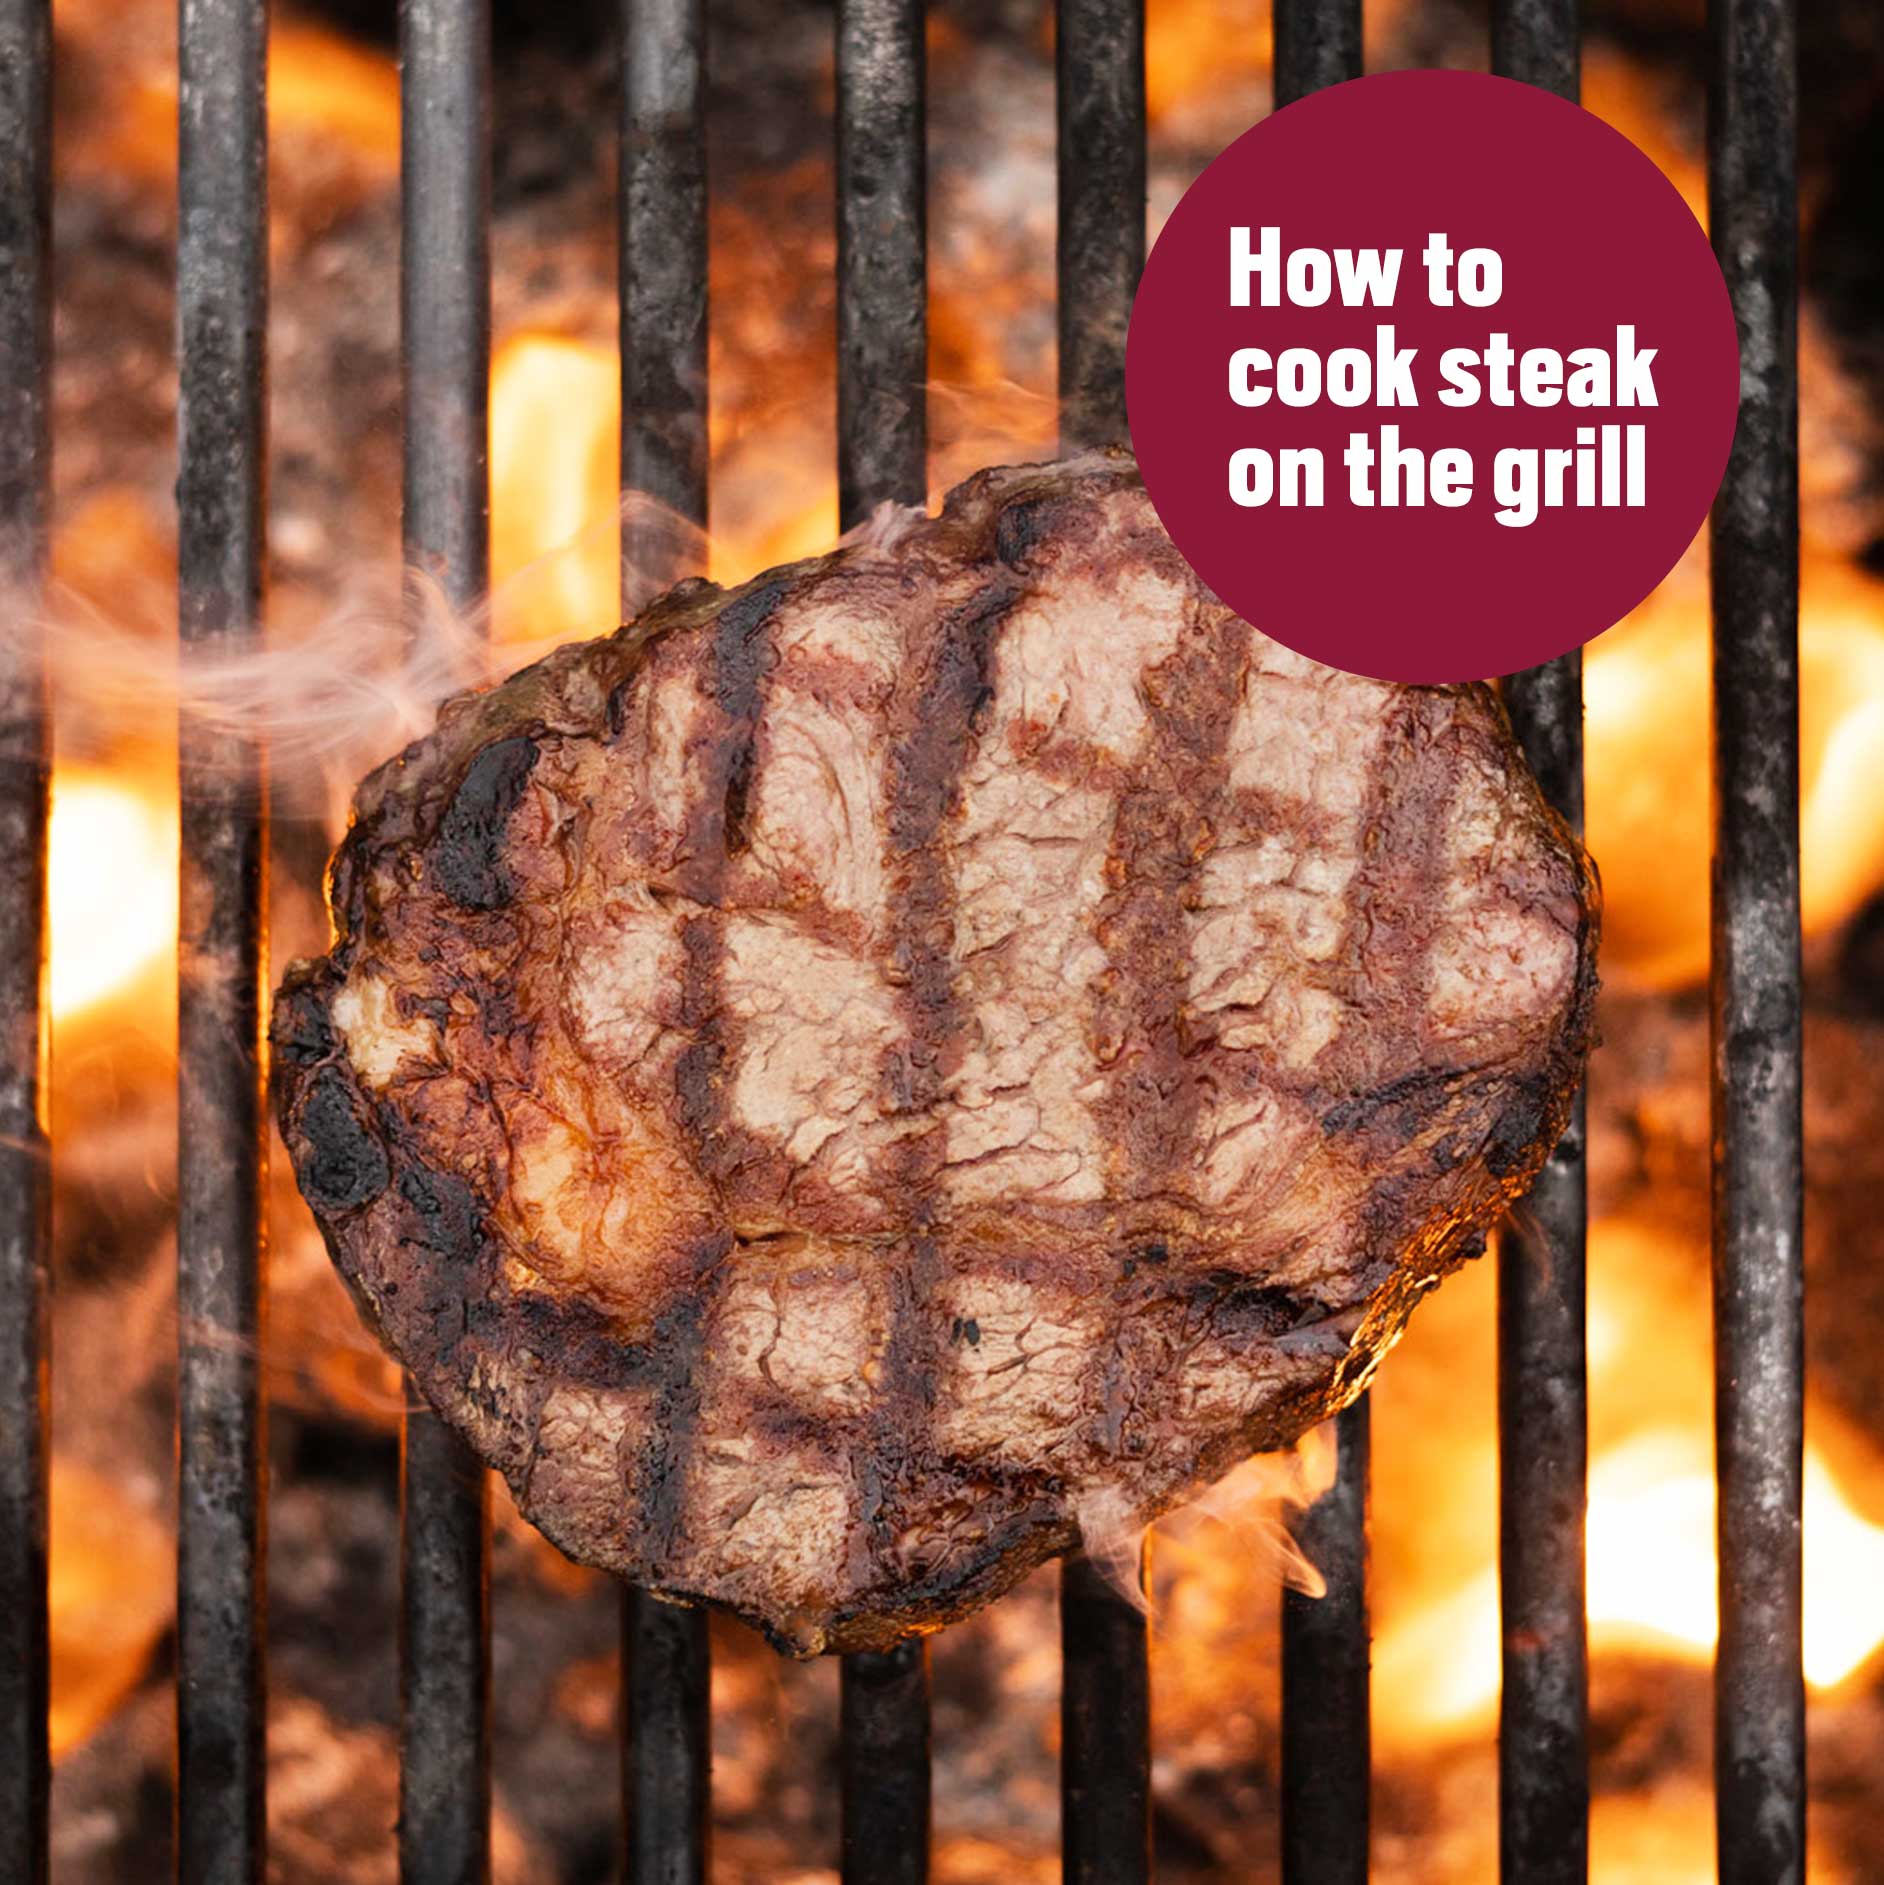 How to grill steak to perfection